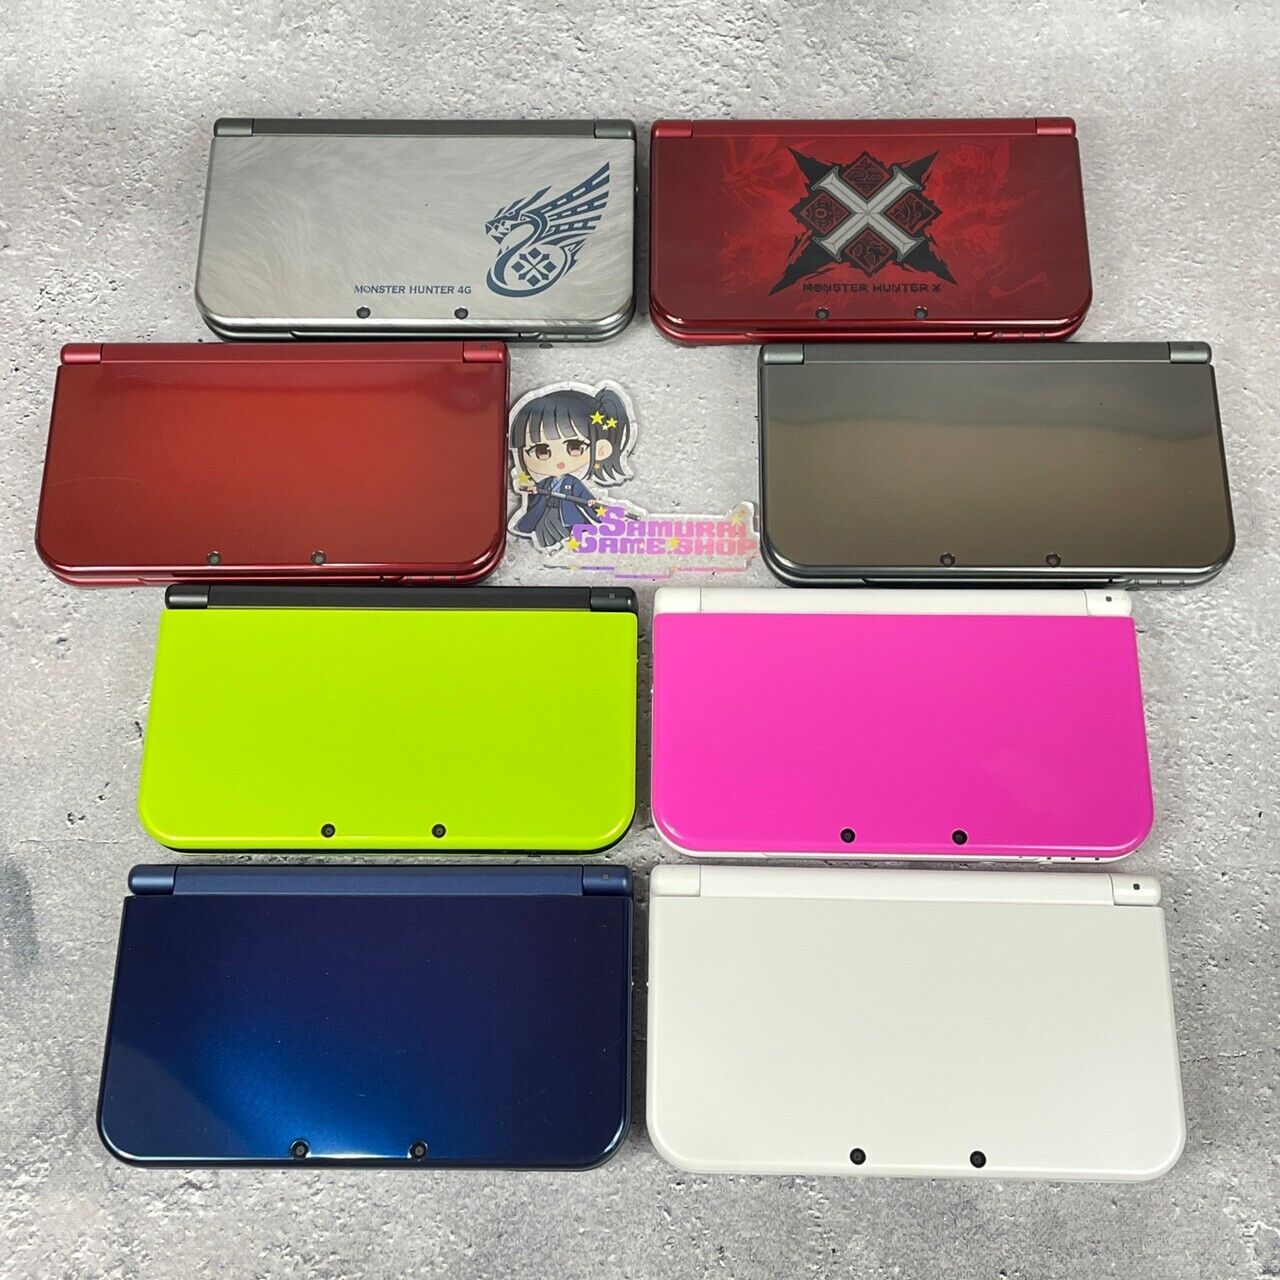 Nintendo new 3DS LL XL Game Console ONLY Japanese Language Edition Color Select